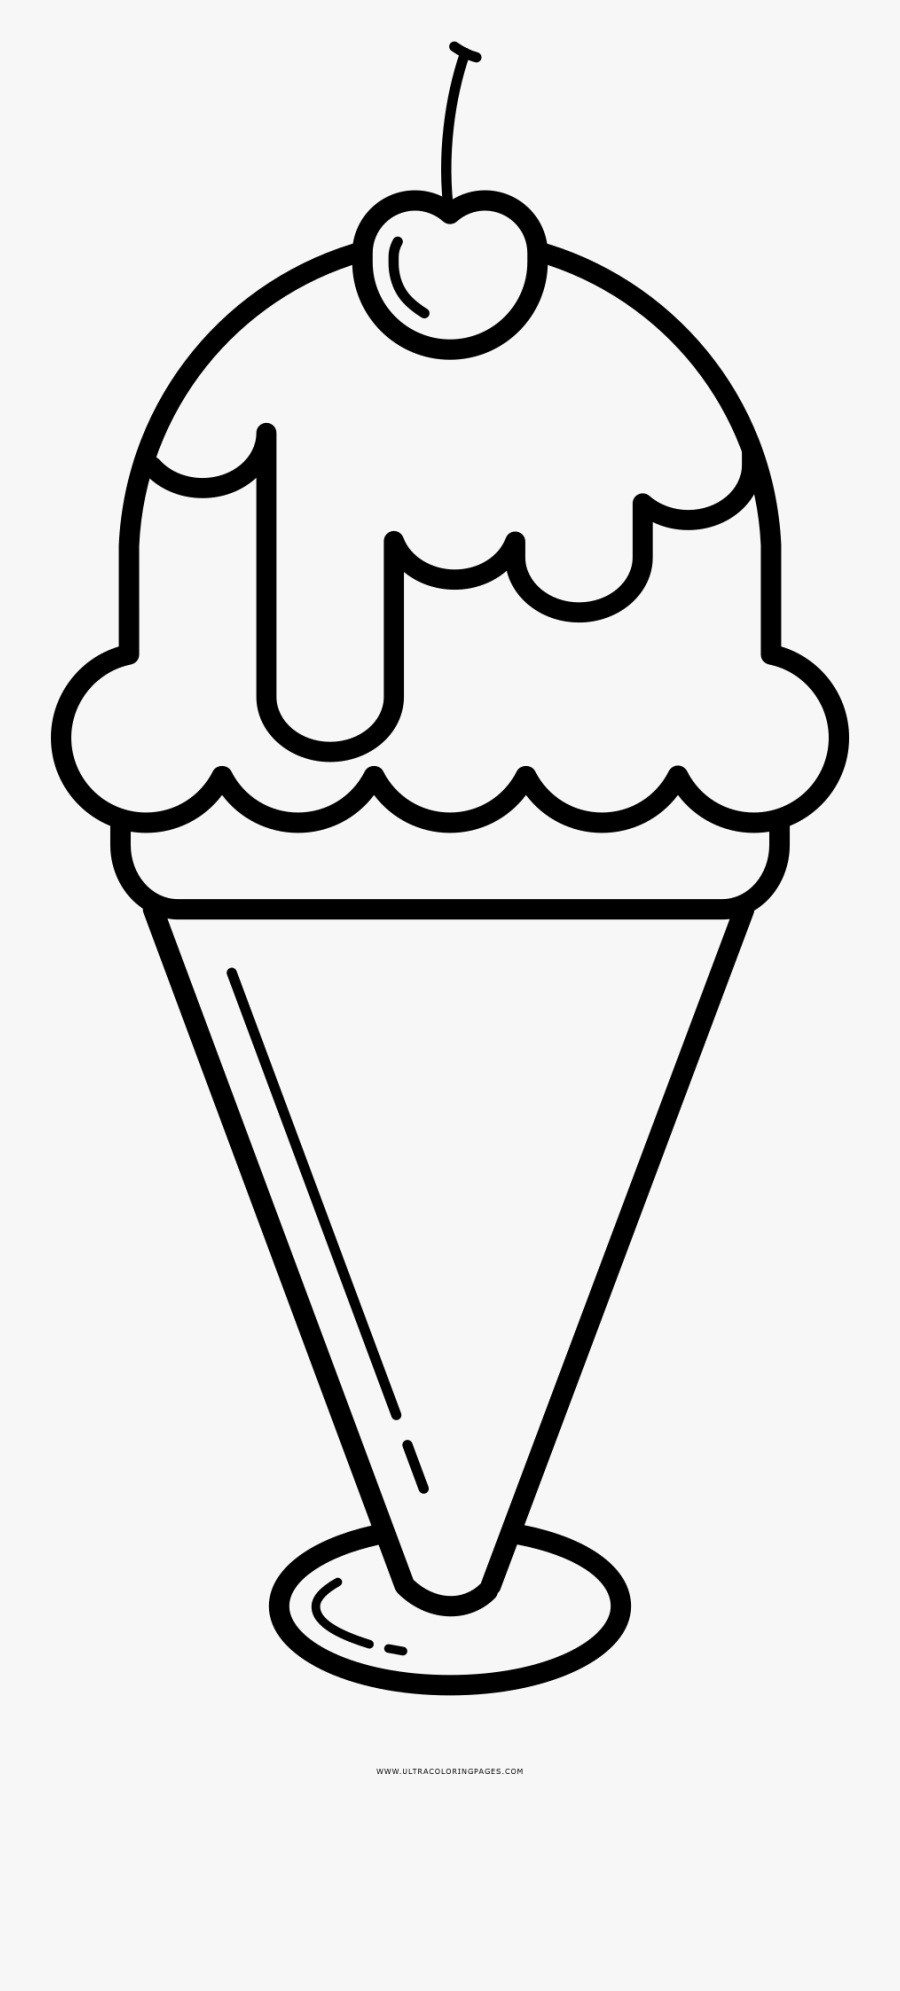 Ice Cream Sundae Coloring Page Sunday Ice Cream Drawings Free Transparent Clipart Clipartkey